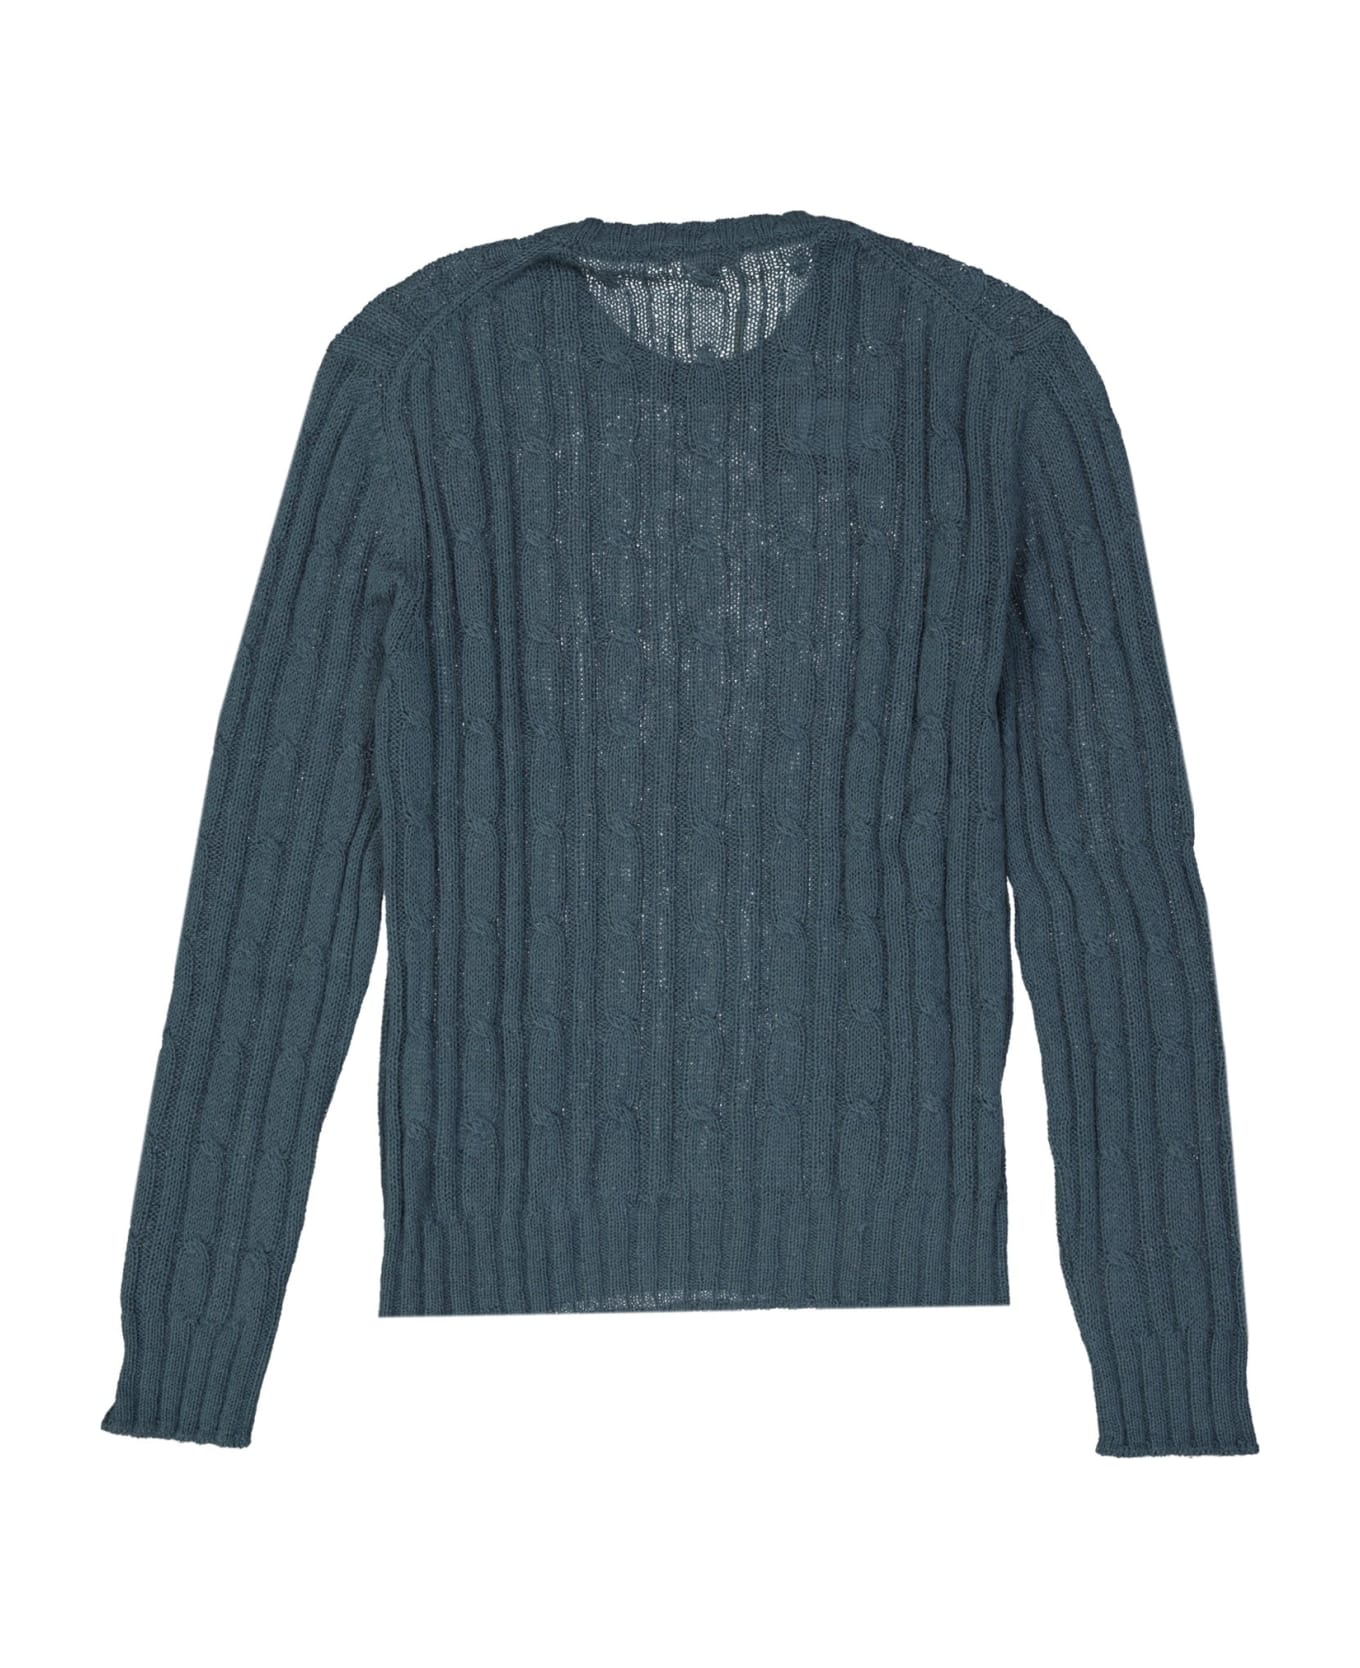 Gucci Cable Knit Sweater - Green